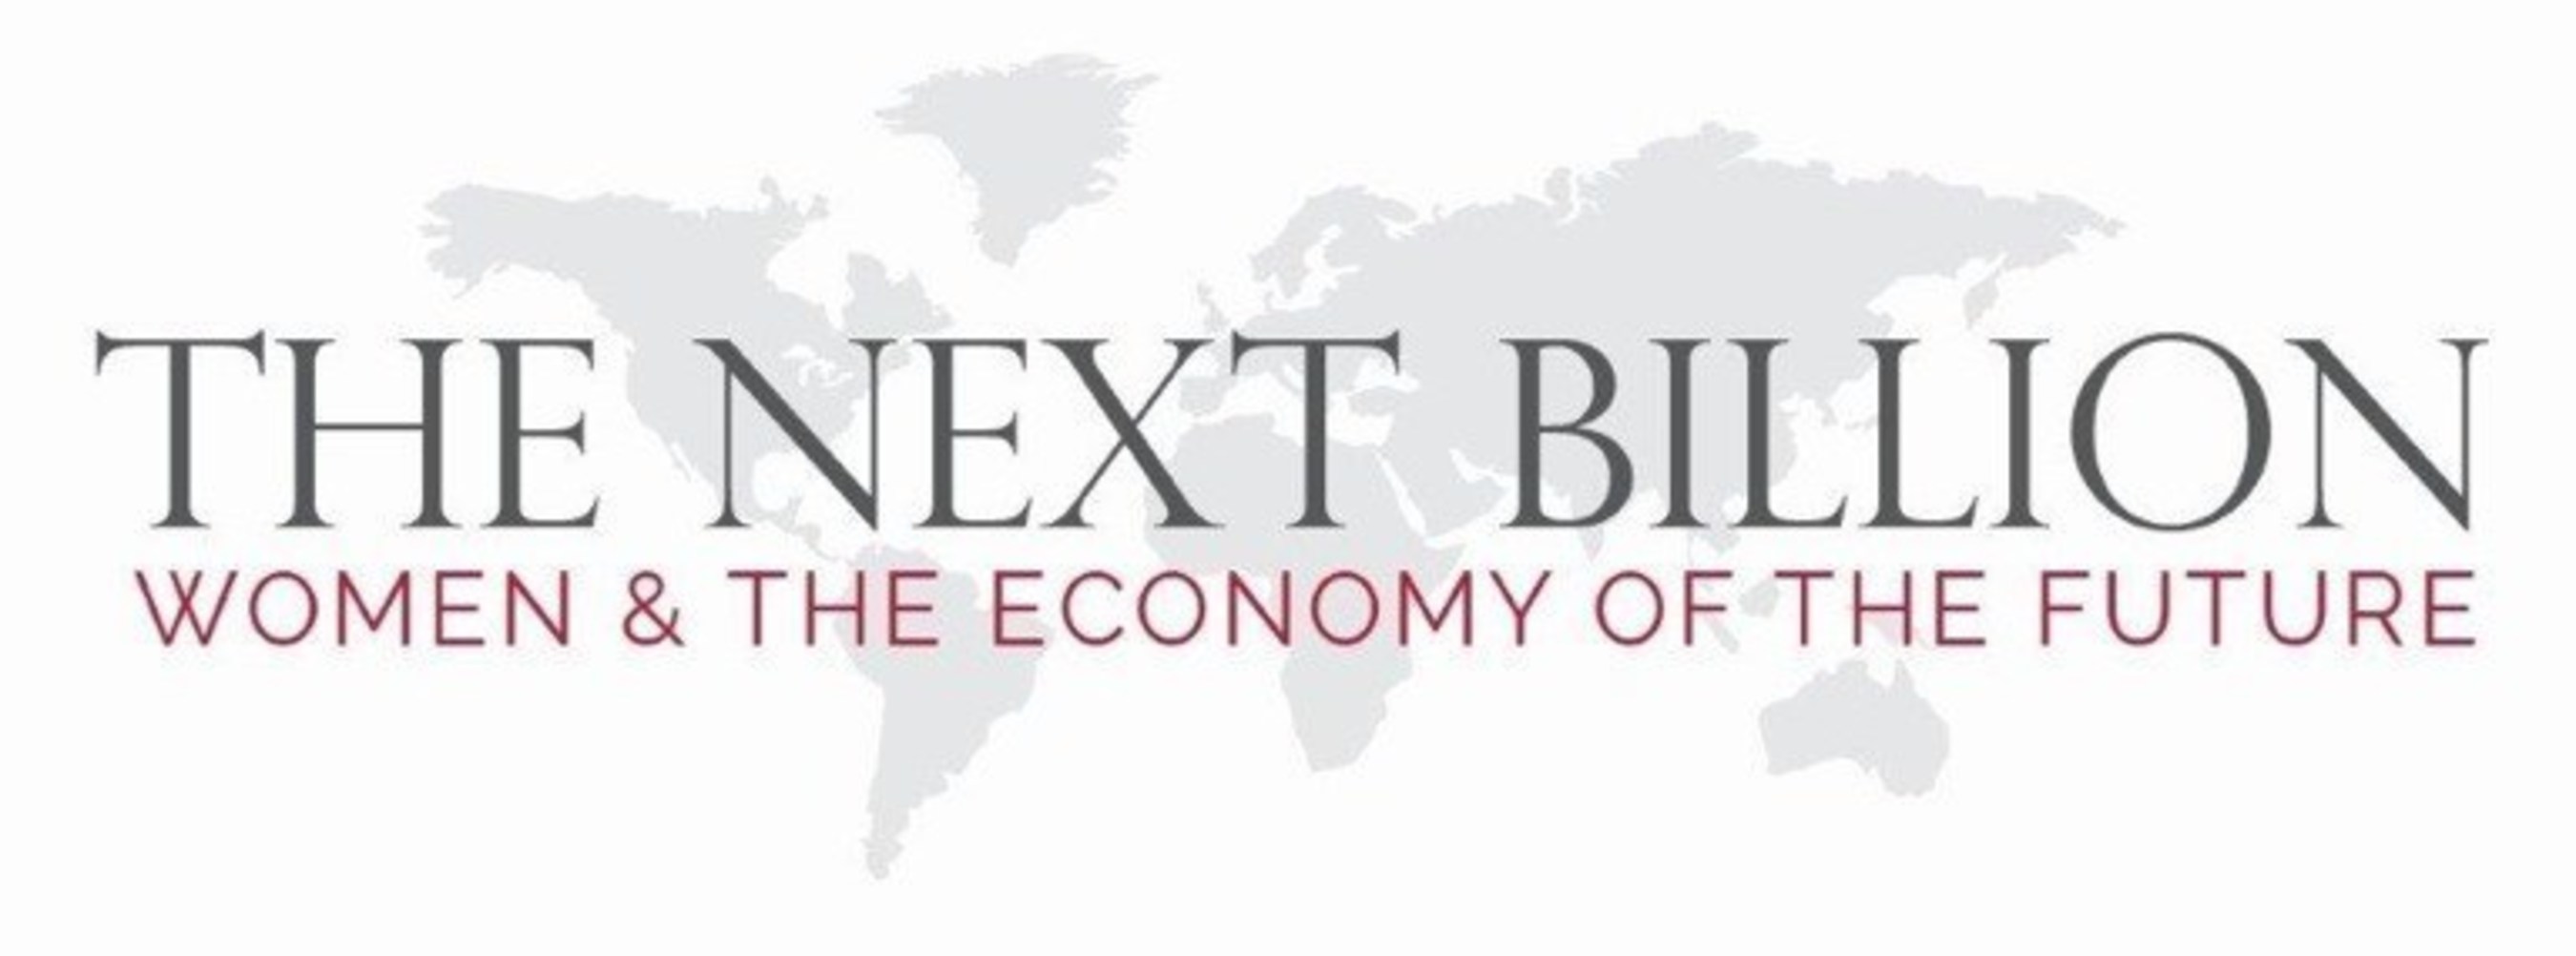 The Next Billion: Women & The Economy of the Future Conference will be held on May 7th in Vancouver. Senior corporate leaders together to discuss concrete, practical ways in which women - as consumers, employees, entrepreneurs and executives - can contribute to the continuing success of companies in the international economy.